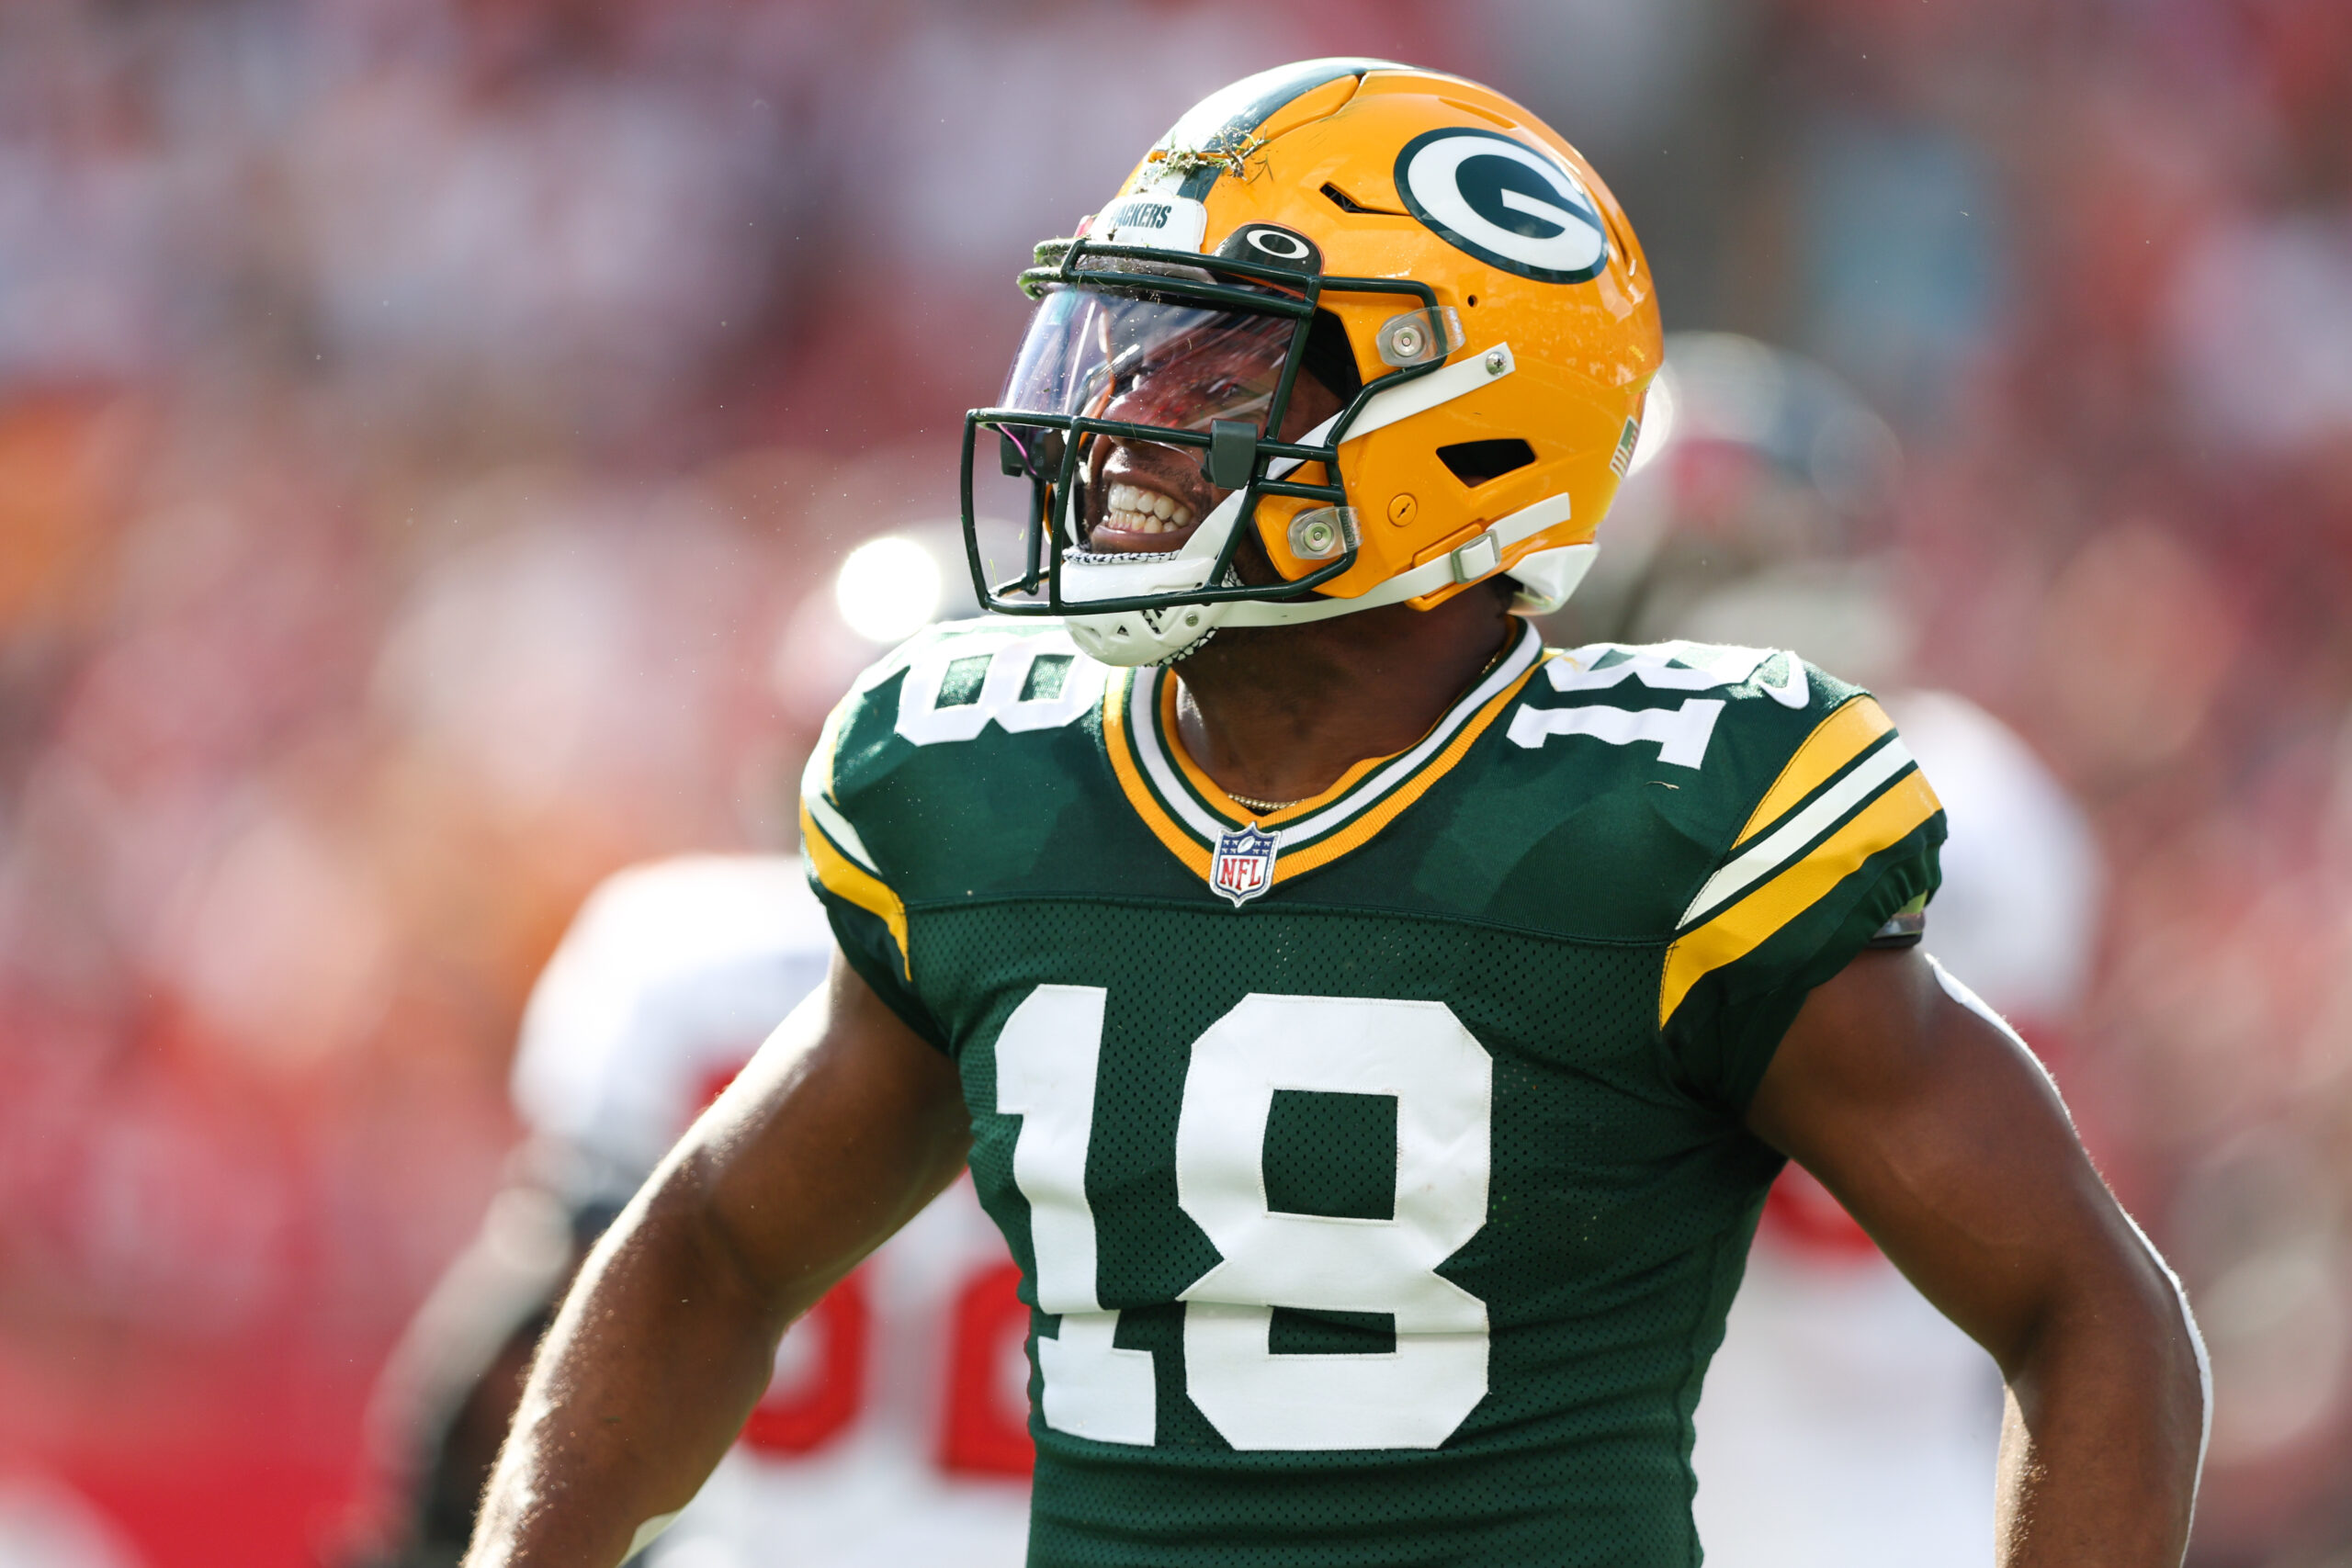 Free agent WR Randall Cobb intends to play in 2023